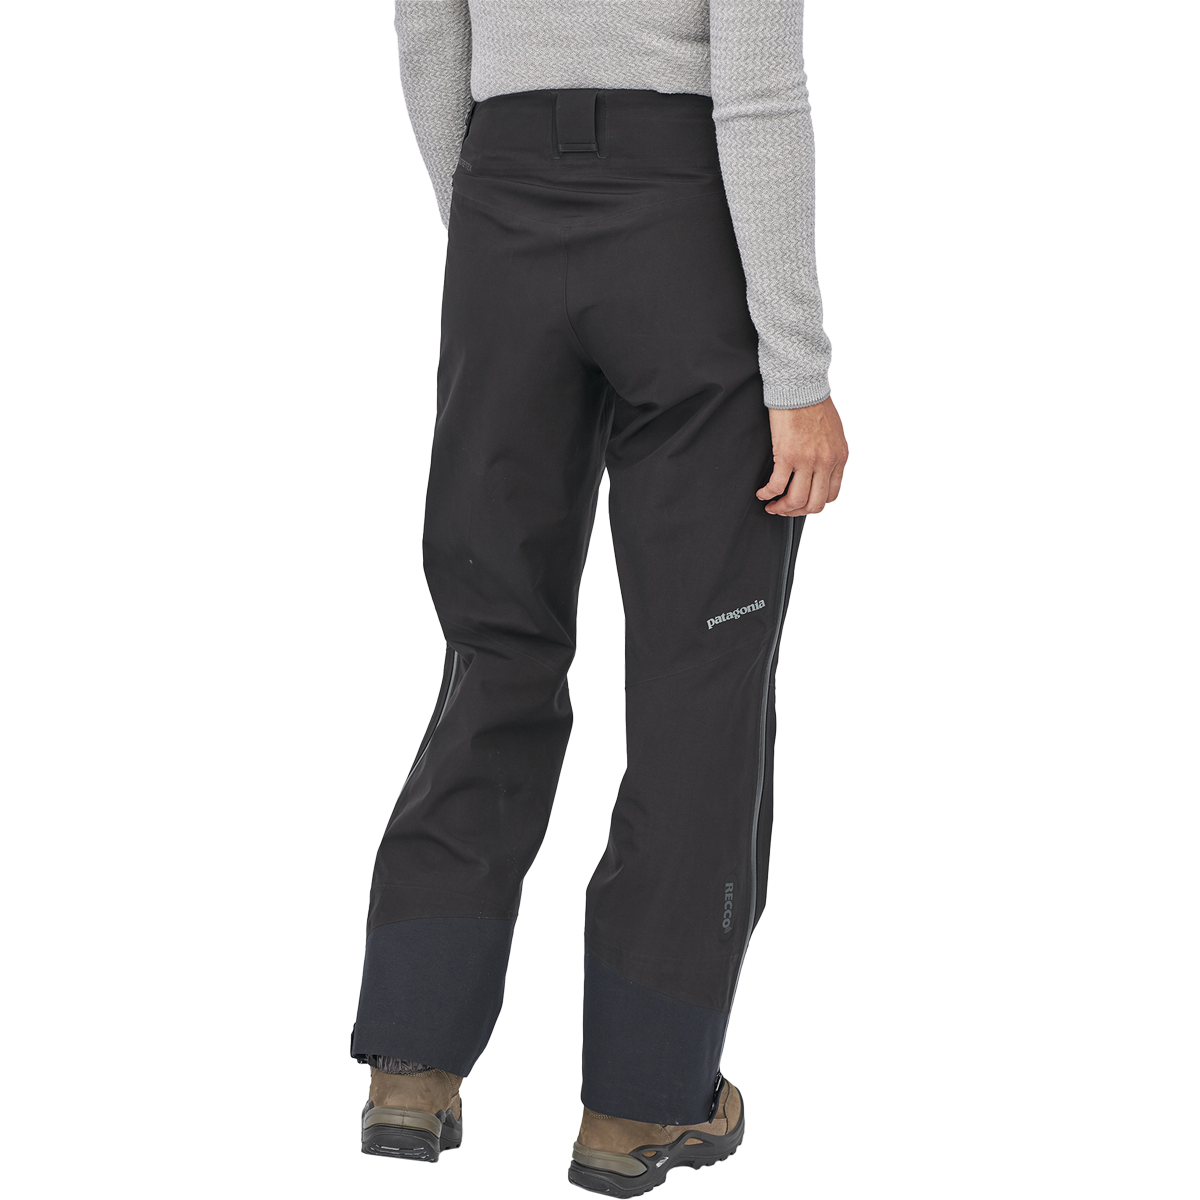 Patagonia Triolet Pant - Wonderful Recycled Gore-Tex Pants - Engearment